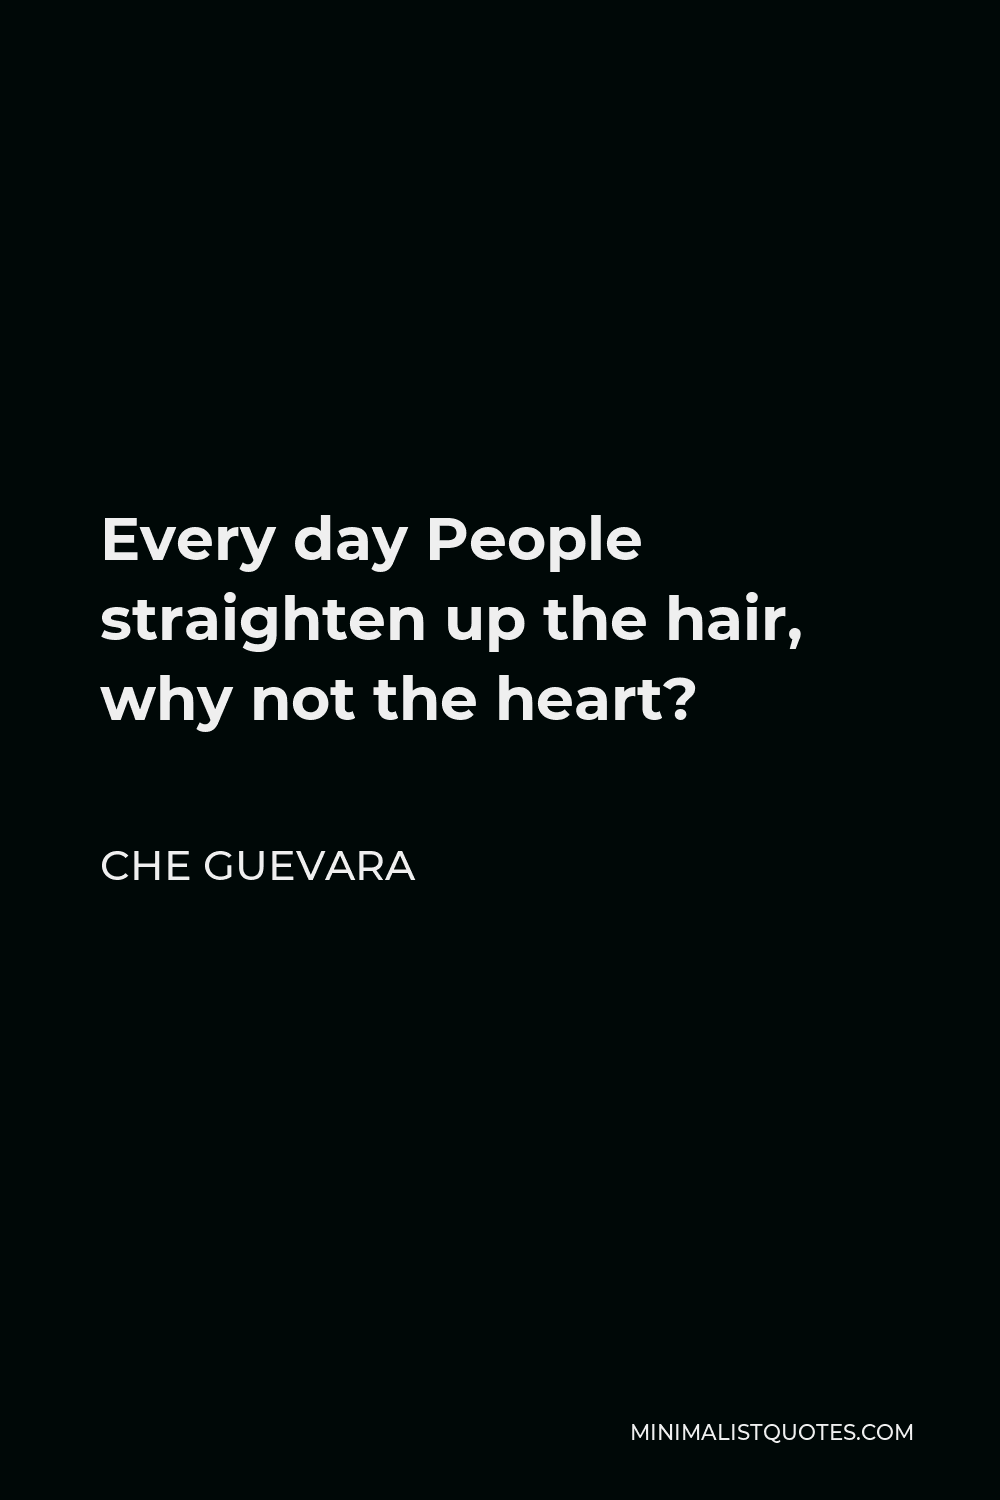 60 Funny Hair Quotes to Share  HairstyleCamp